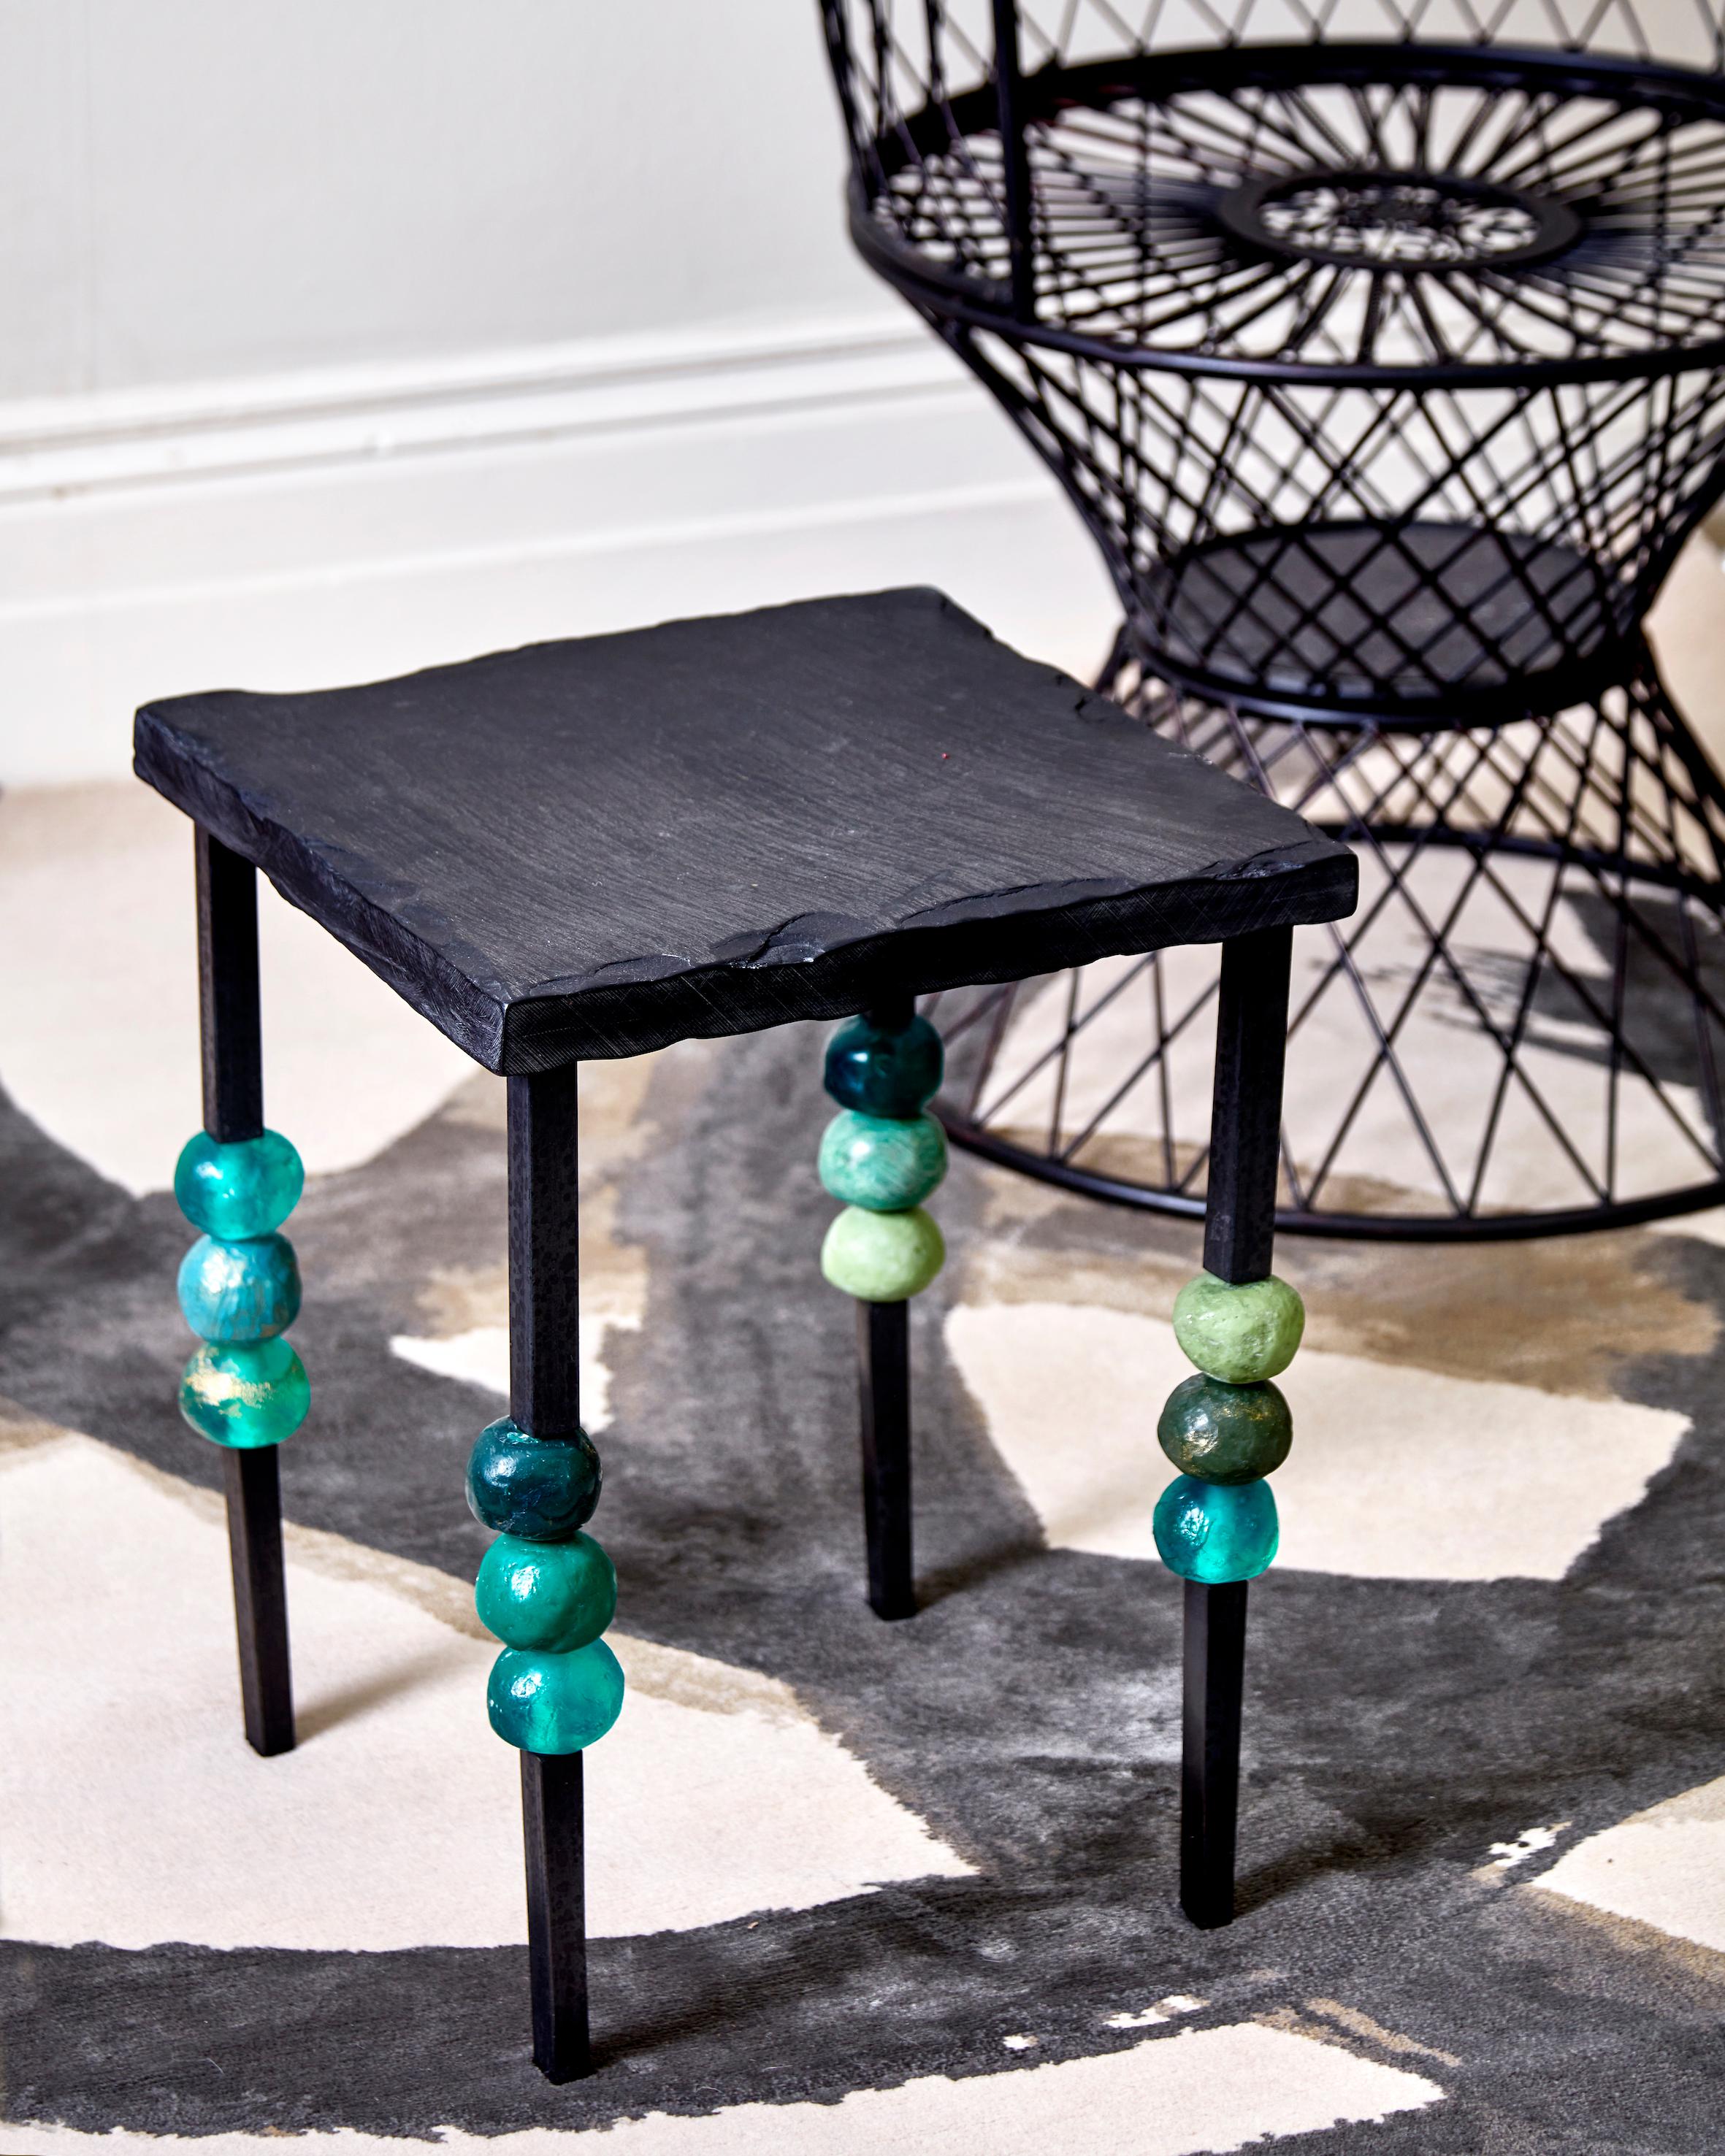 Announcing a new addition to the MW functional art family with this classic occasional table enhanced with the artist’s signature resin elements epitomising her unique style.

The legs are constructed out of blackened steel whilst the top is